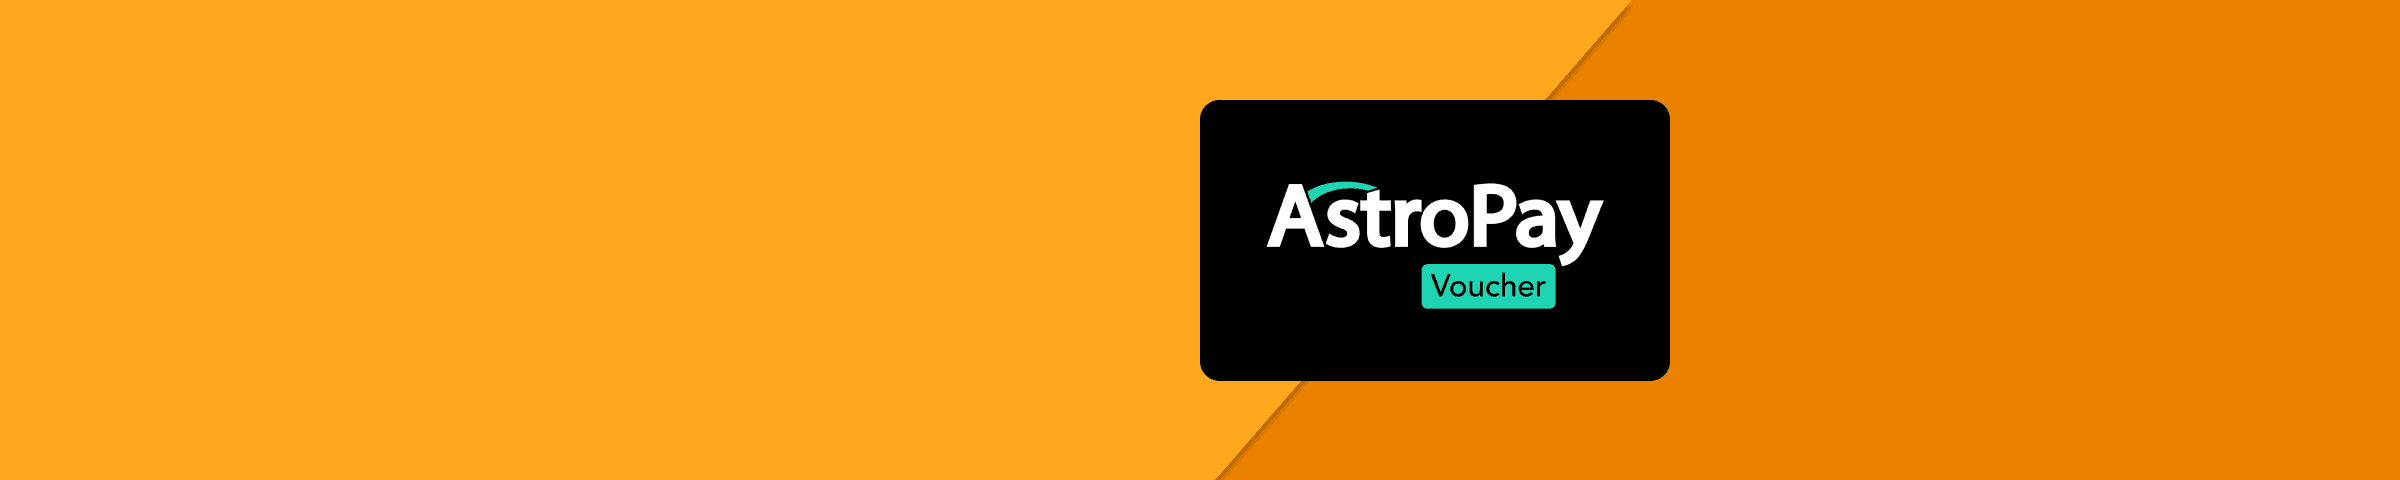 AstroPay AT